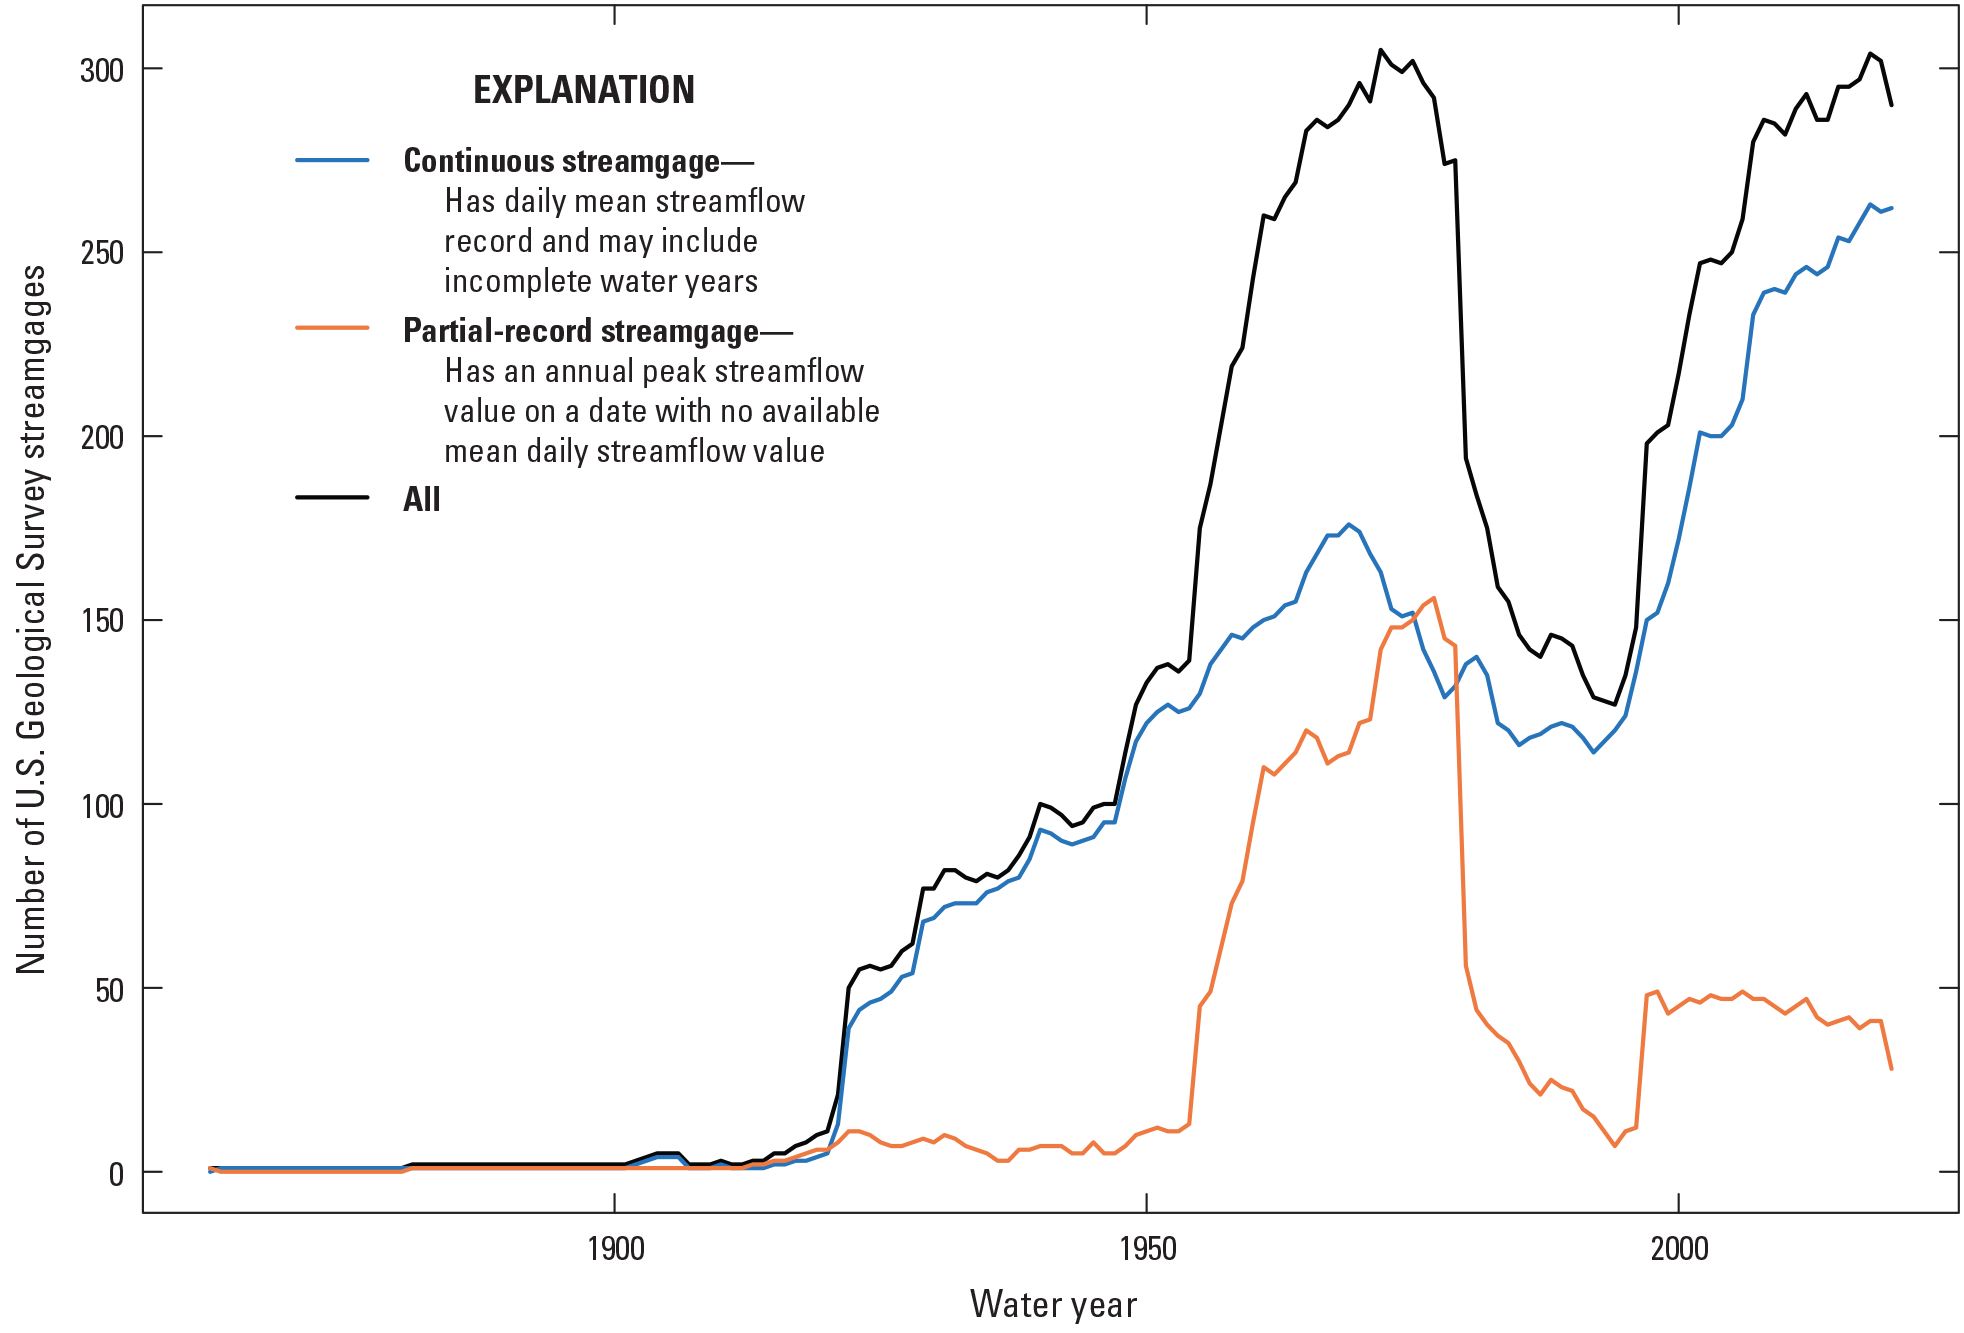 Number of USGS streamgages with peak streamflow records in Missouri from 1862 to 2020.
                     Numbers are less than 10 until about 1920, where they increase to about 50, reach
                     a peak of around 300 in the 1970s, decrease to about 150 in the 1990s, and then increase
                     to about 300 again in the 2000s.